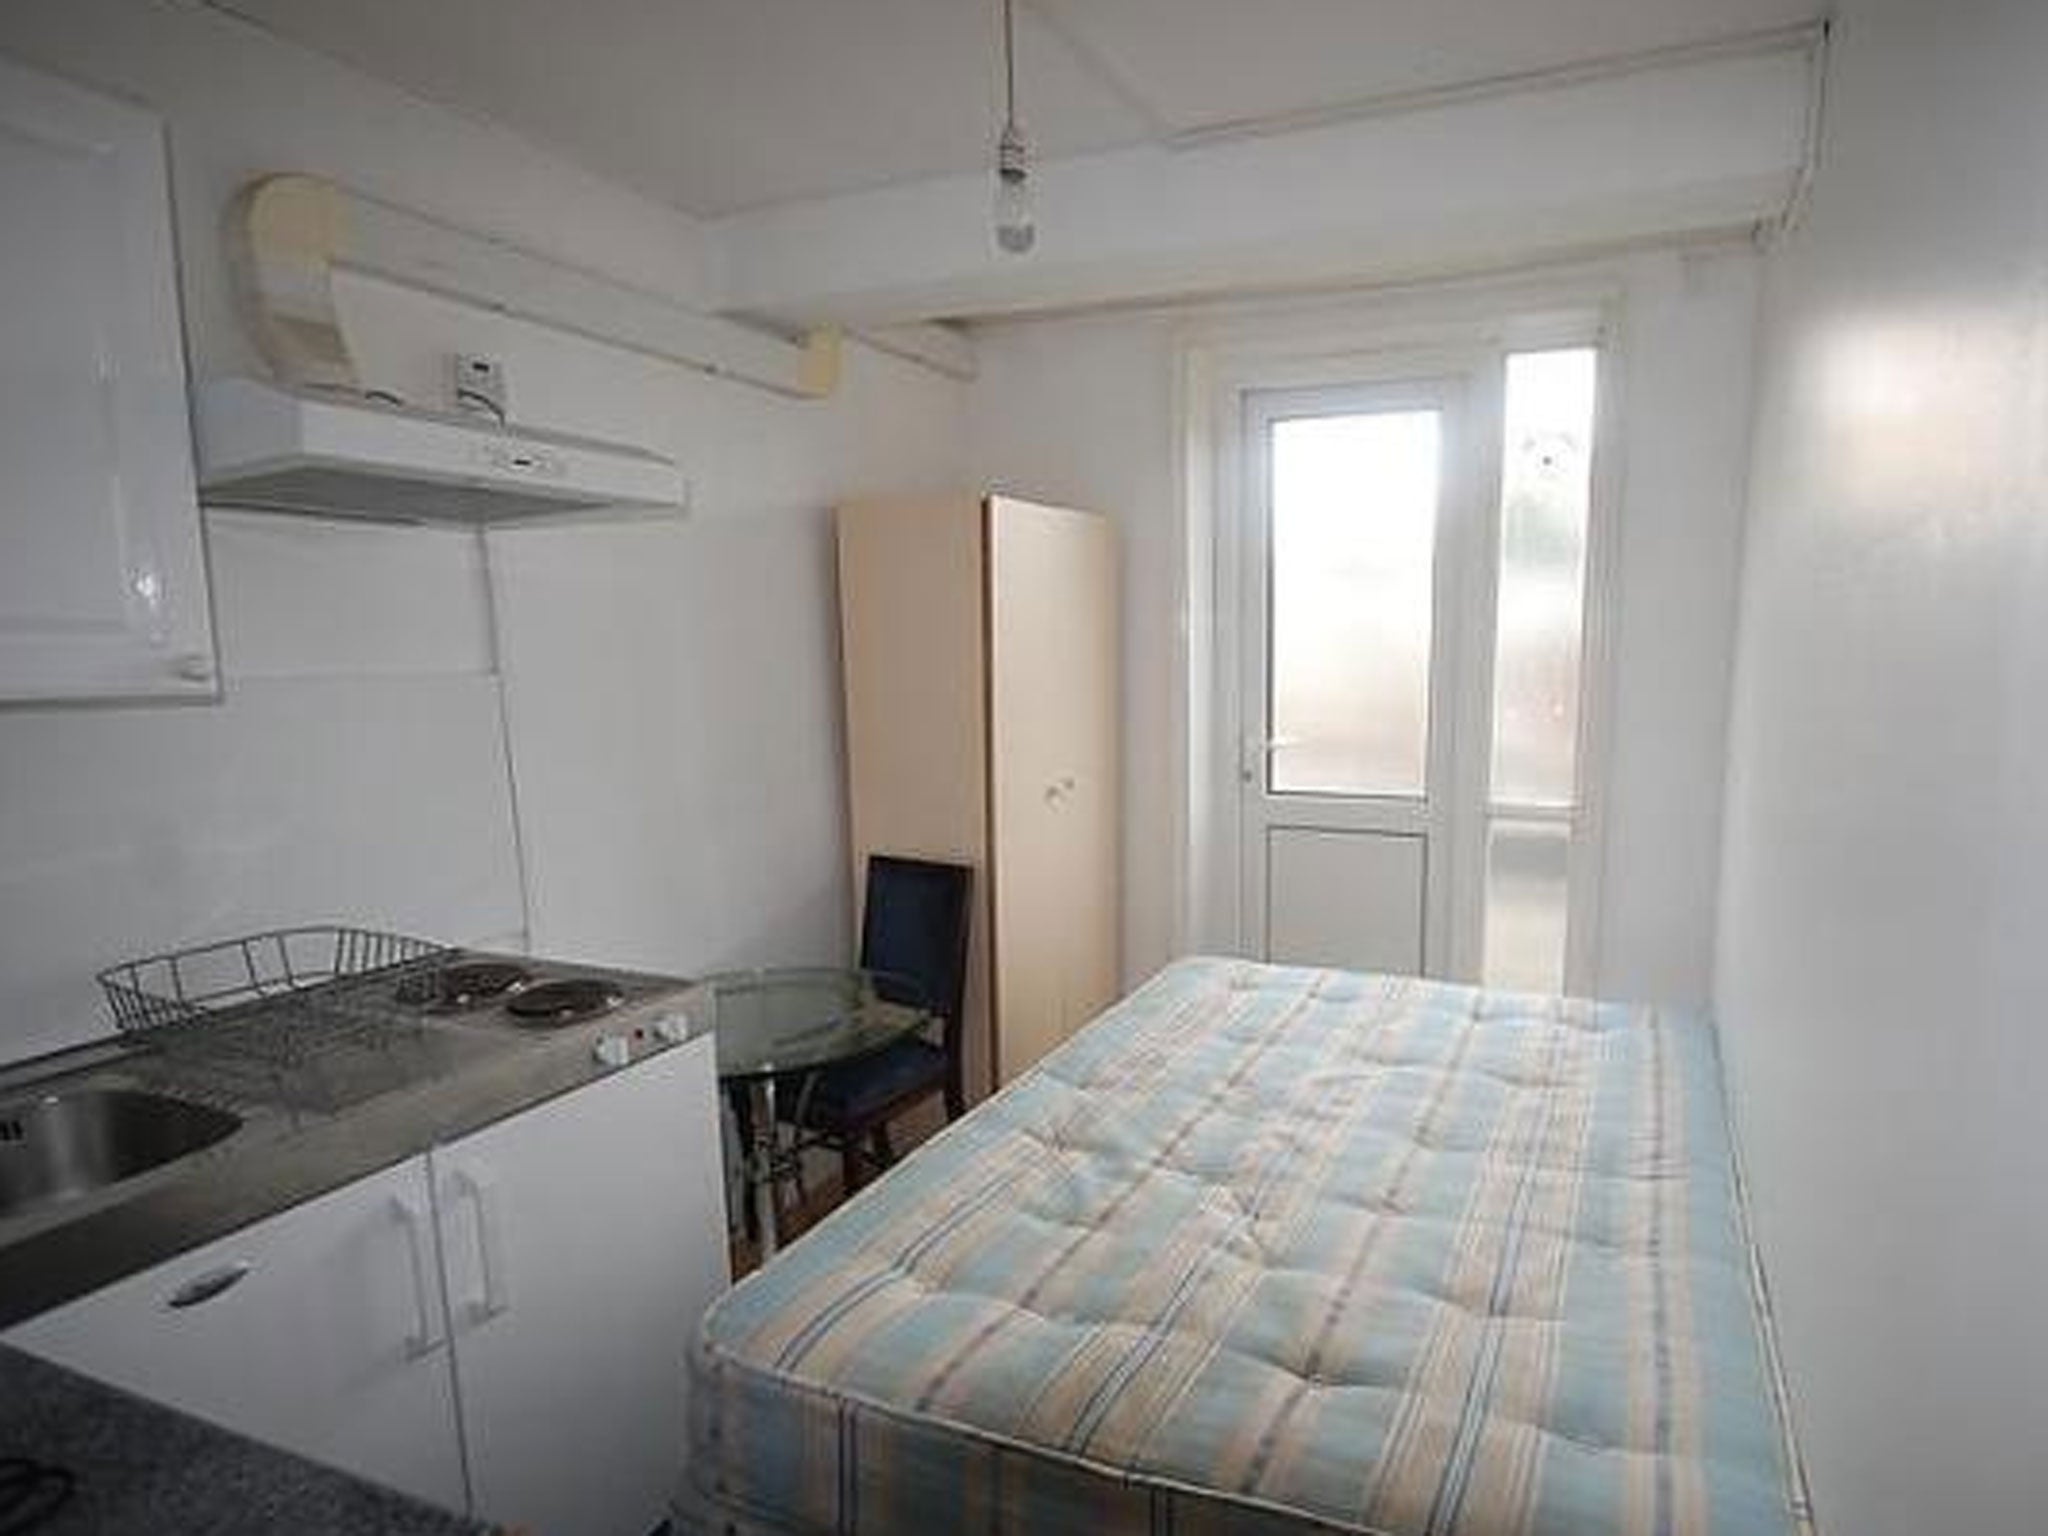 A studio flat for rent in Kember Street, north London,